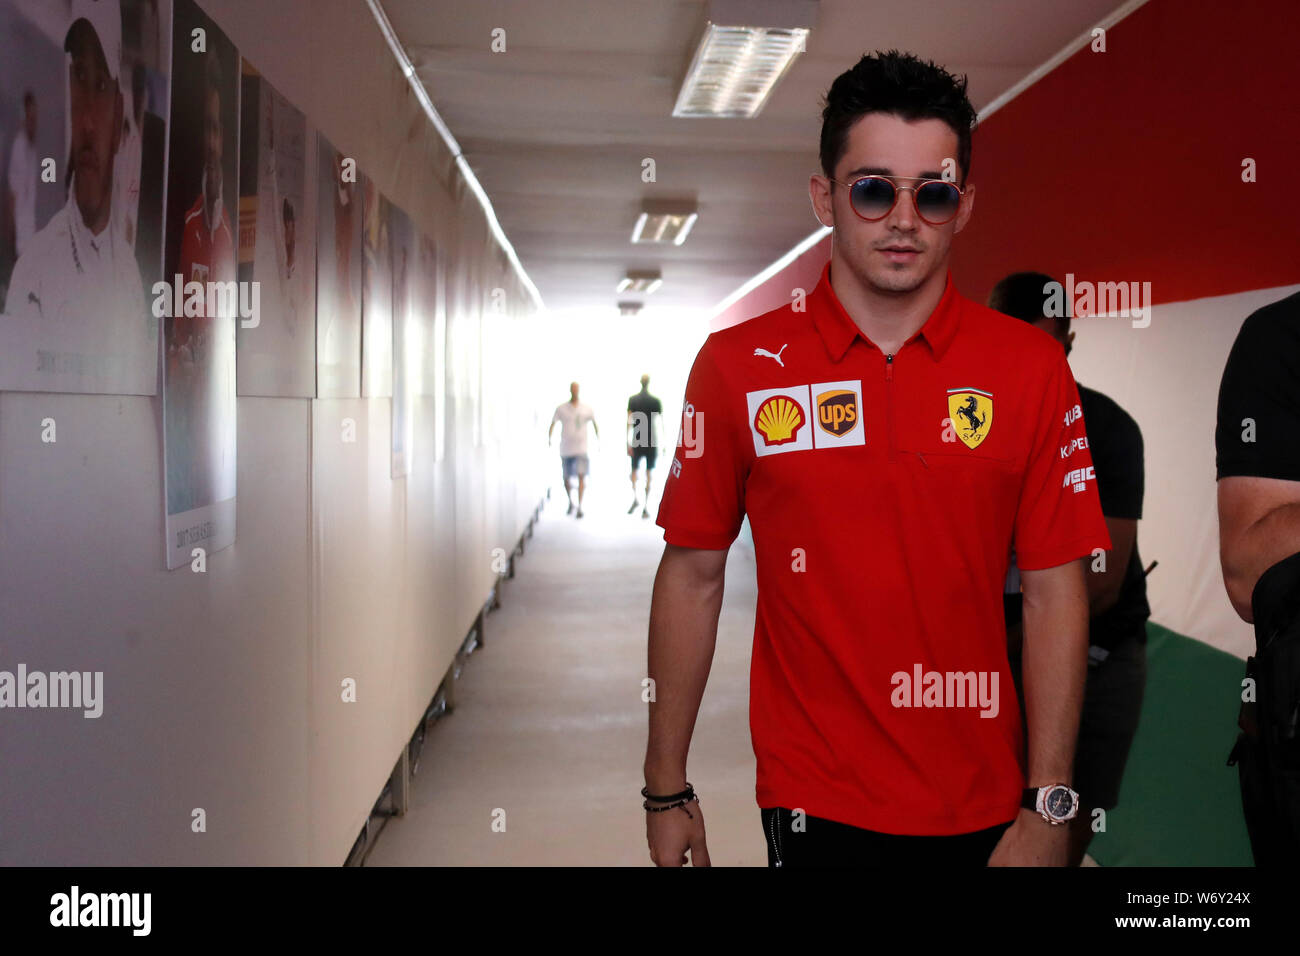 Budapest, Hungary. 02th August, 2019. Charles Leclerc of Scuderia Ferrari  in the paddock during the F1 Grand Prix of Hungary Credit: Marco  Canoniero/Alamy Live News Stock Photo - Alamy